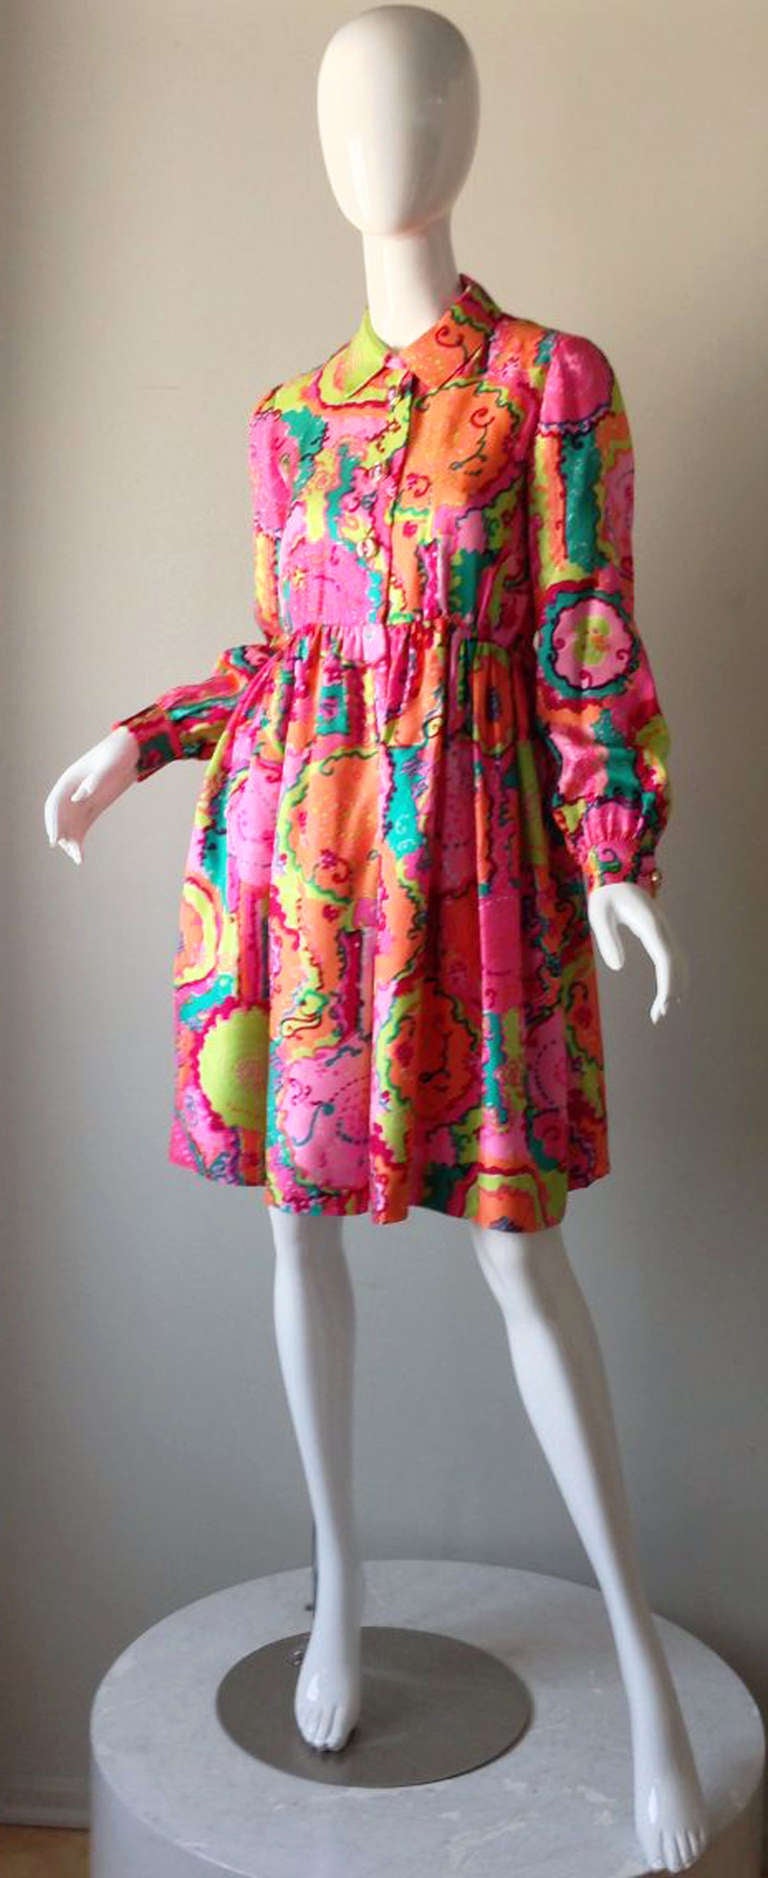 A fine vintage Malcolm Starr babydoll cocktail dress. Charming and vibrant silk twill print item fully lined with large 